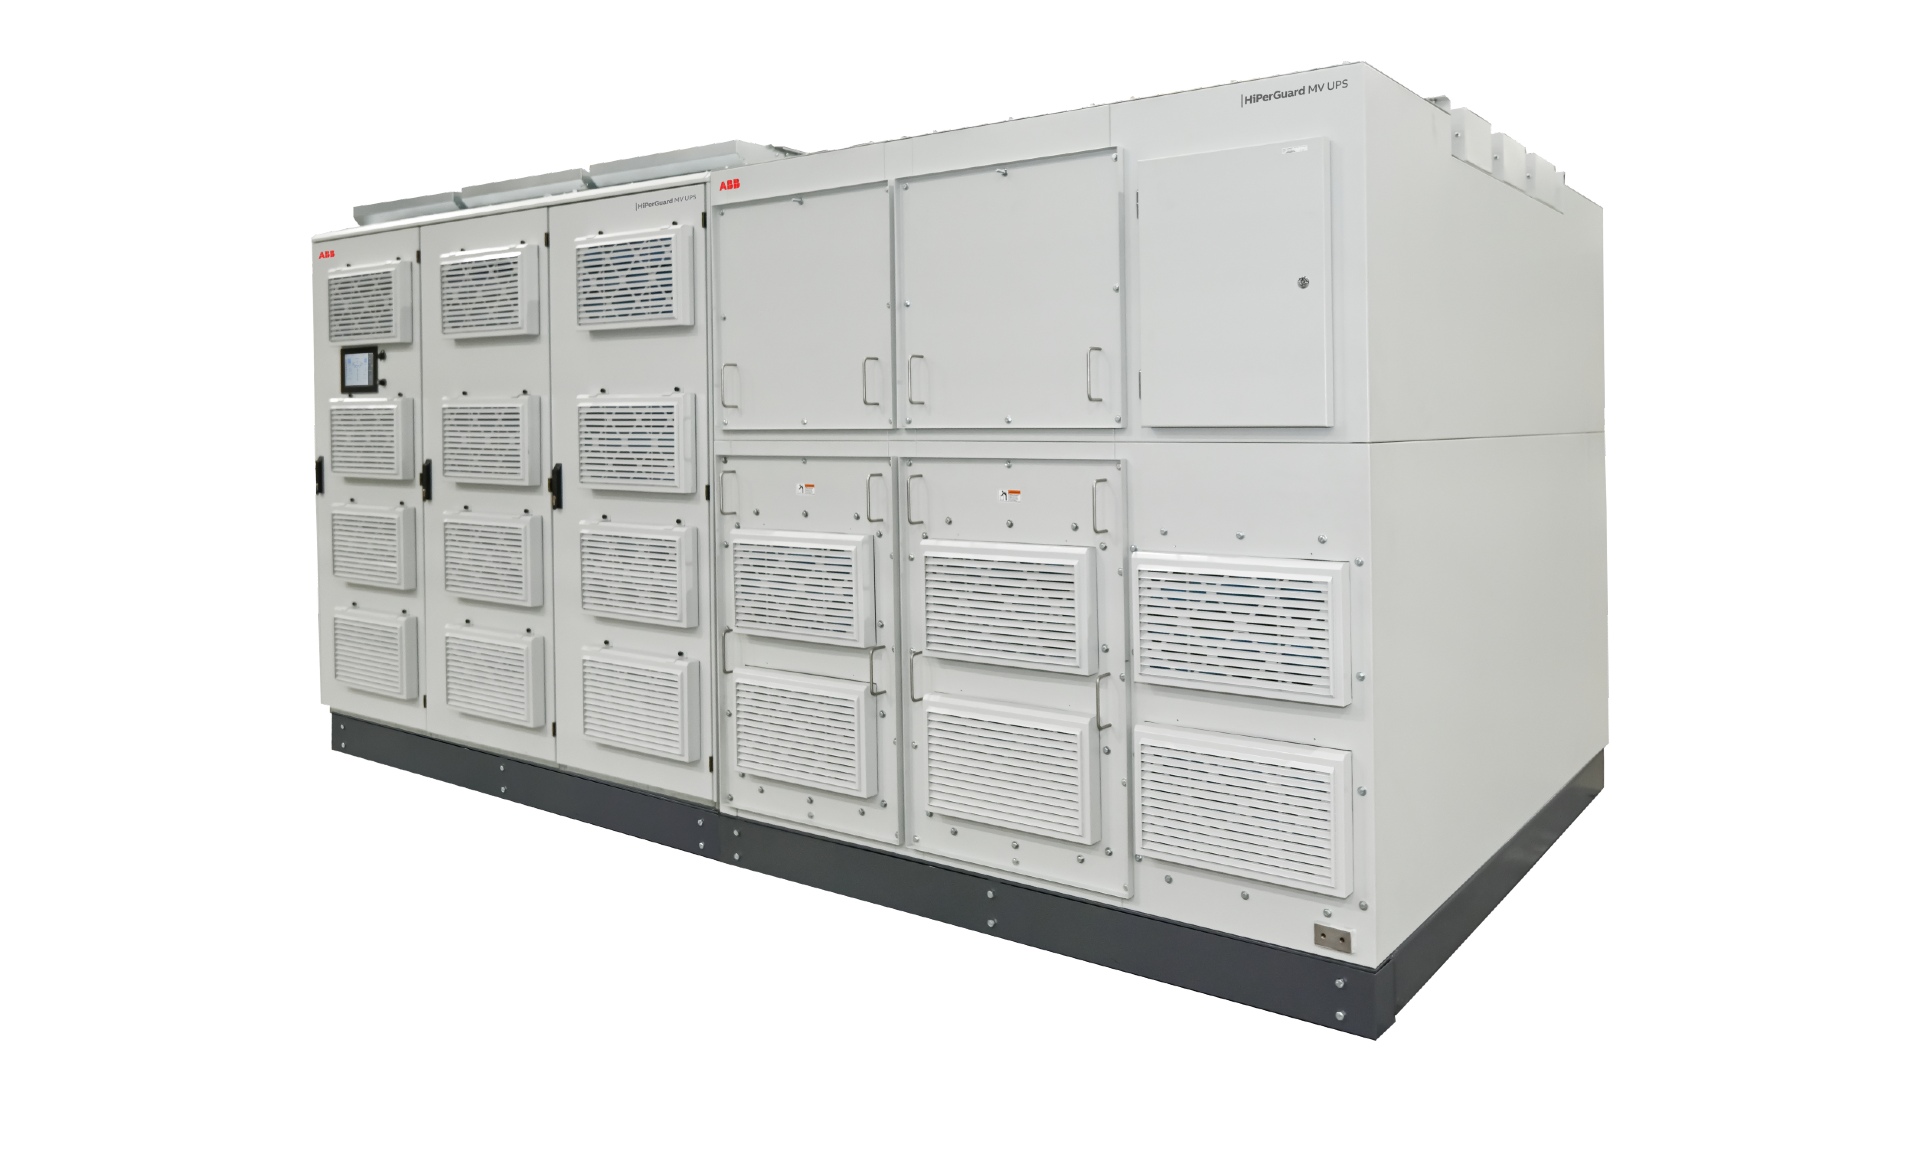 ABB launches industry-first medium voltage UPS that delivers 98 percent efficiency1